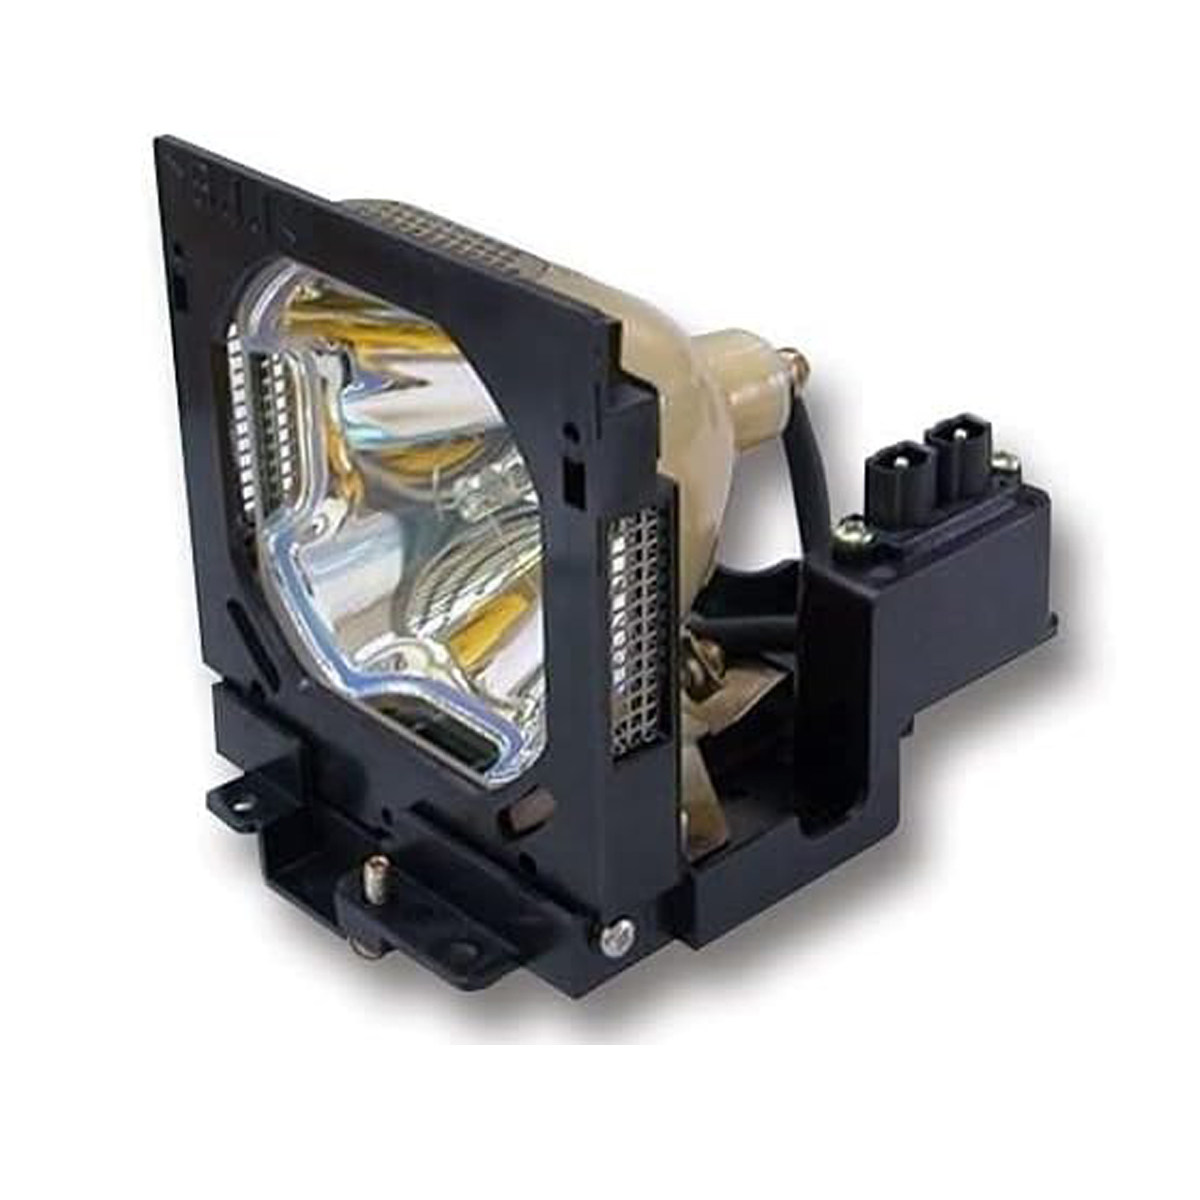 Replacement Projector lamp 456-199 For Dukane Projector